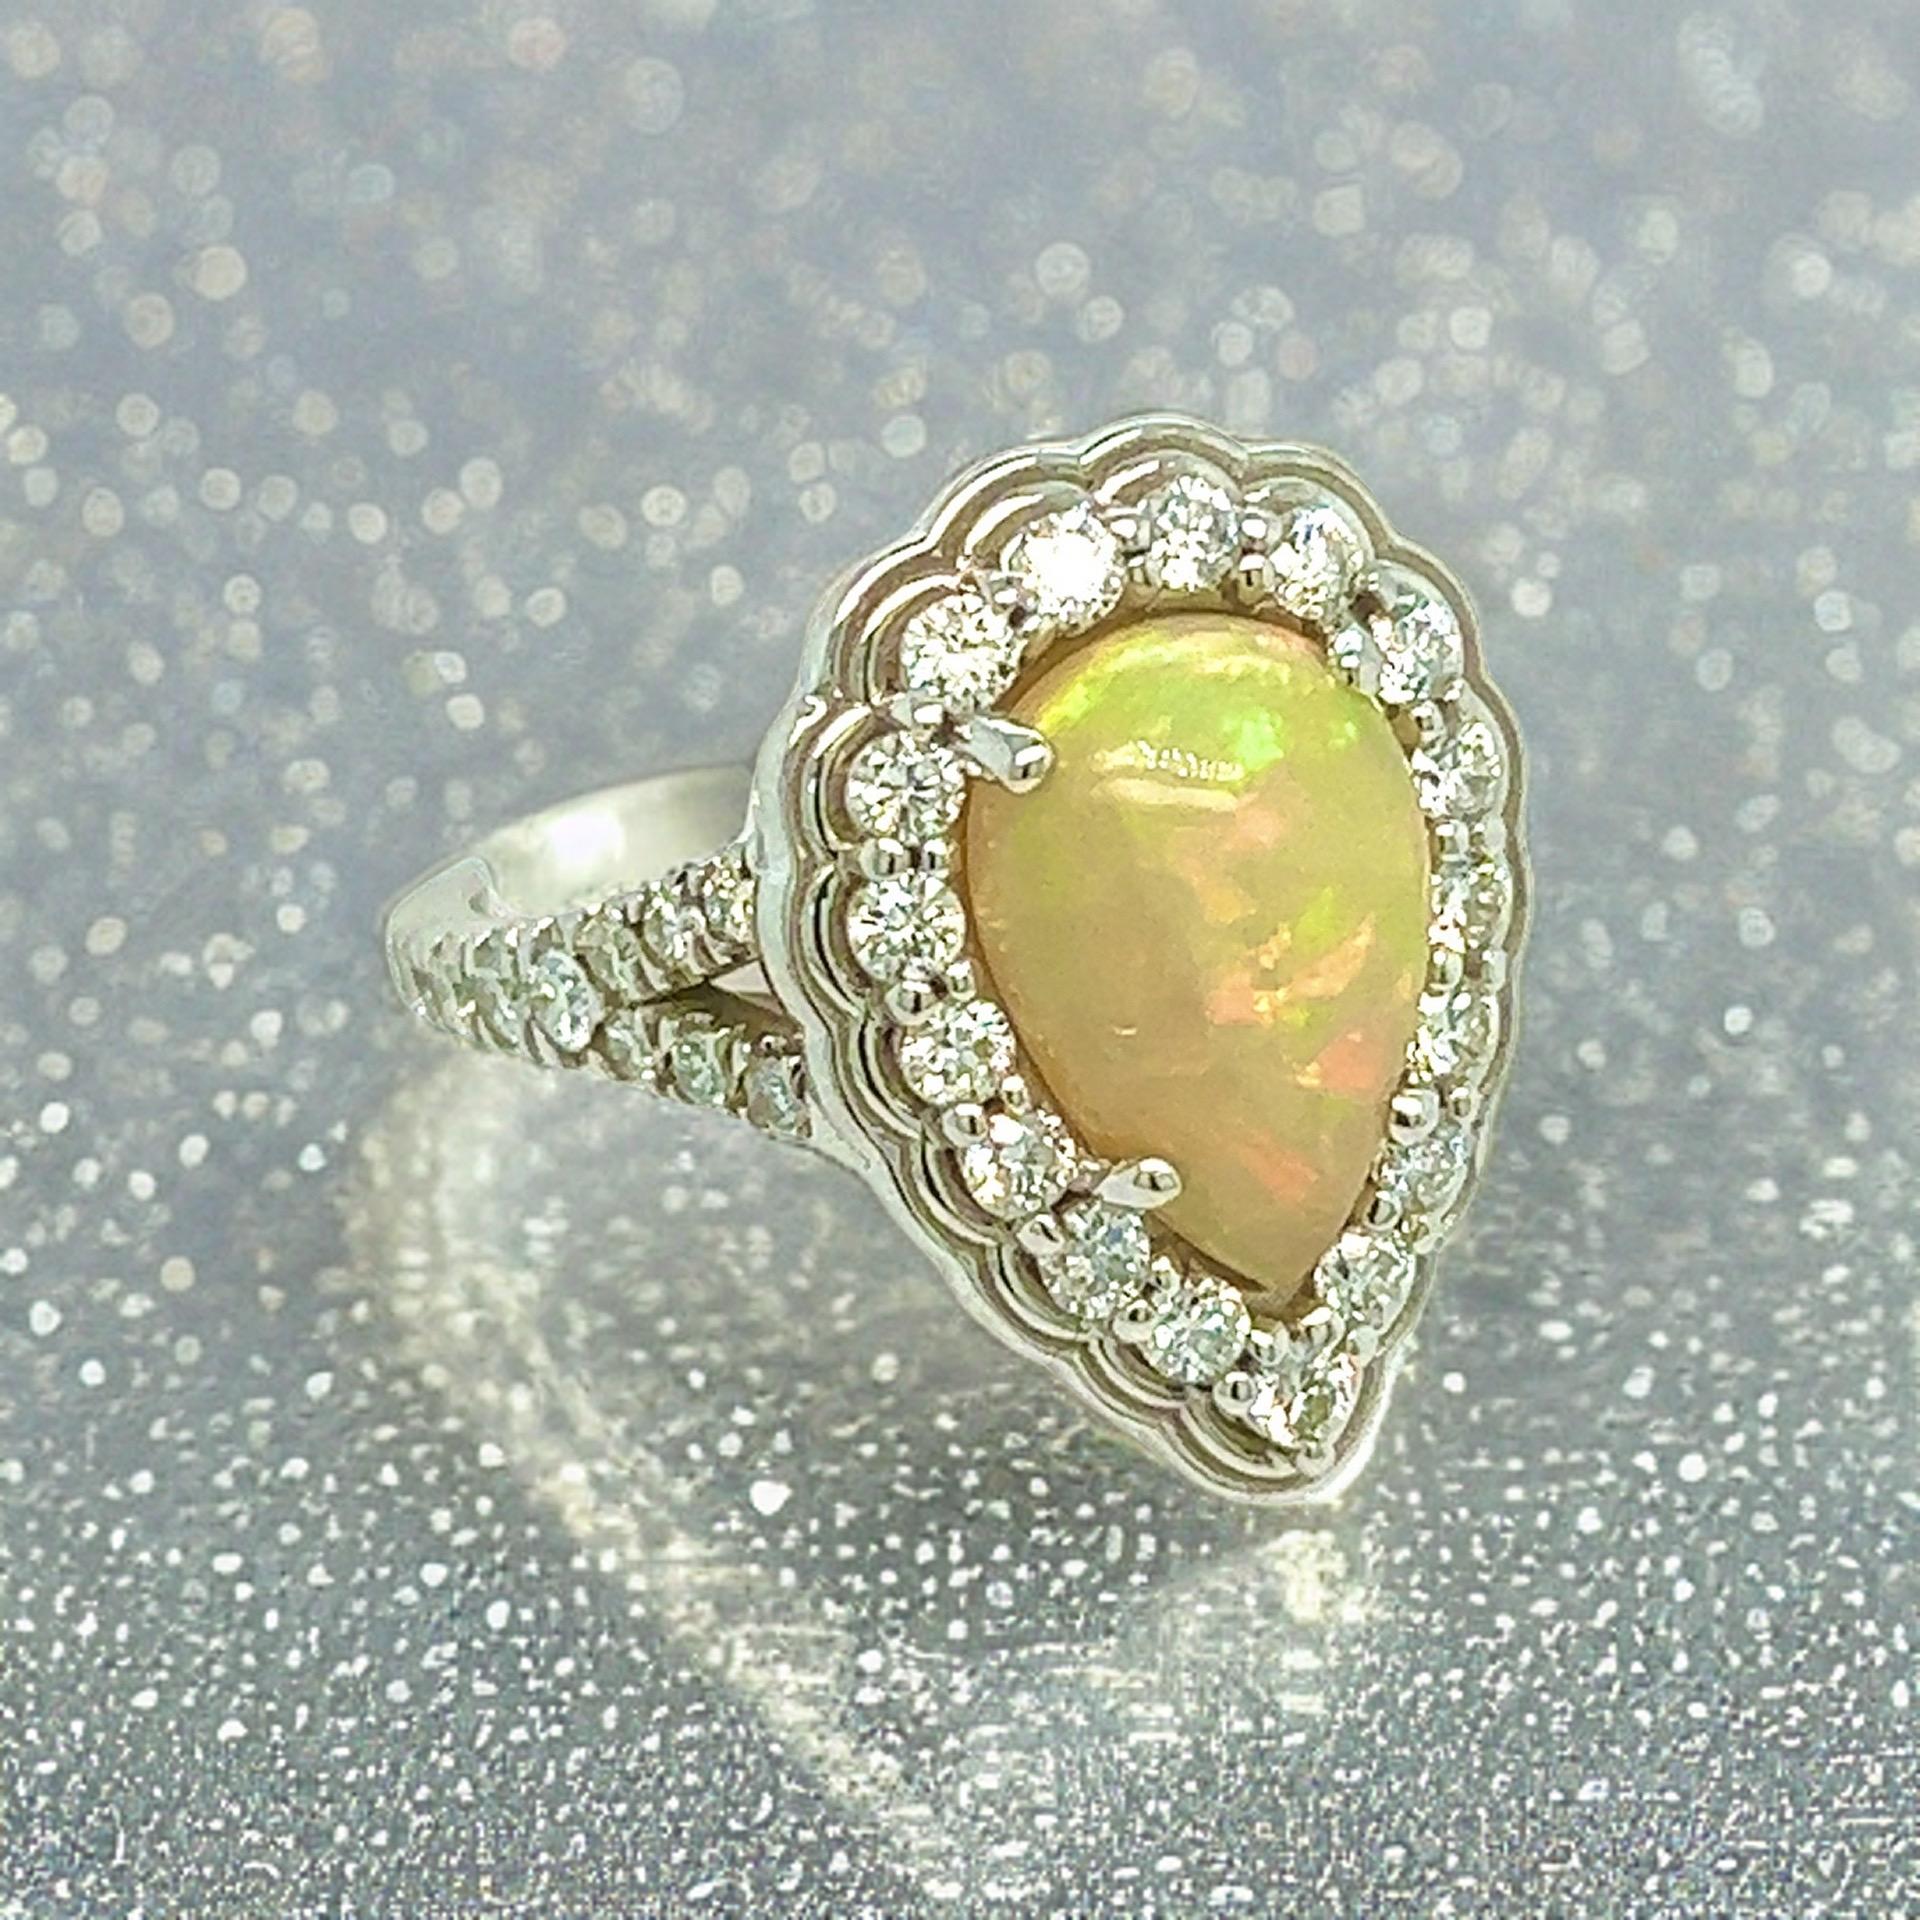 Natural Finely Faceted Quality Opal Diamond Ring 6.25 14k W Gold 2.35 TCW Certified $4,950 304174

This is a Unique Custom Made Glamorous Piece of Jewelry!

Nothing says, “I Love you” more than Diamonds and Pearls!

This white Opal ring has been